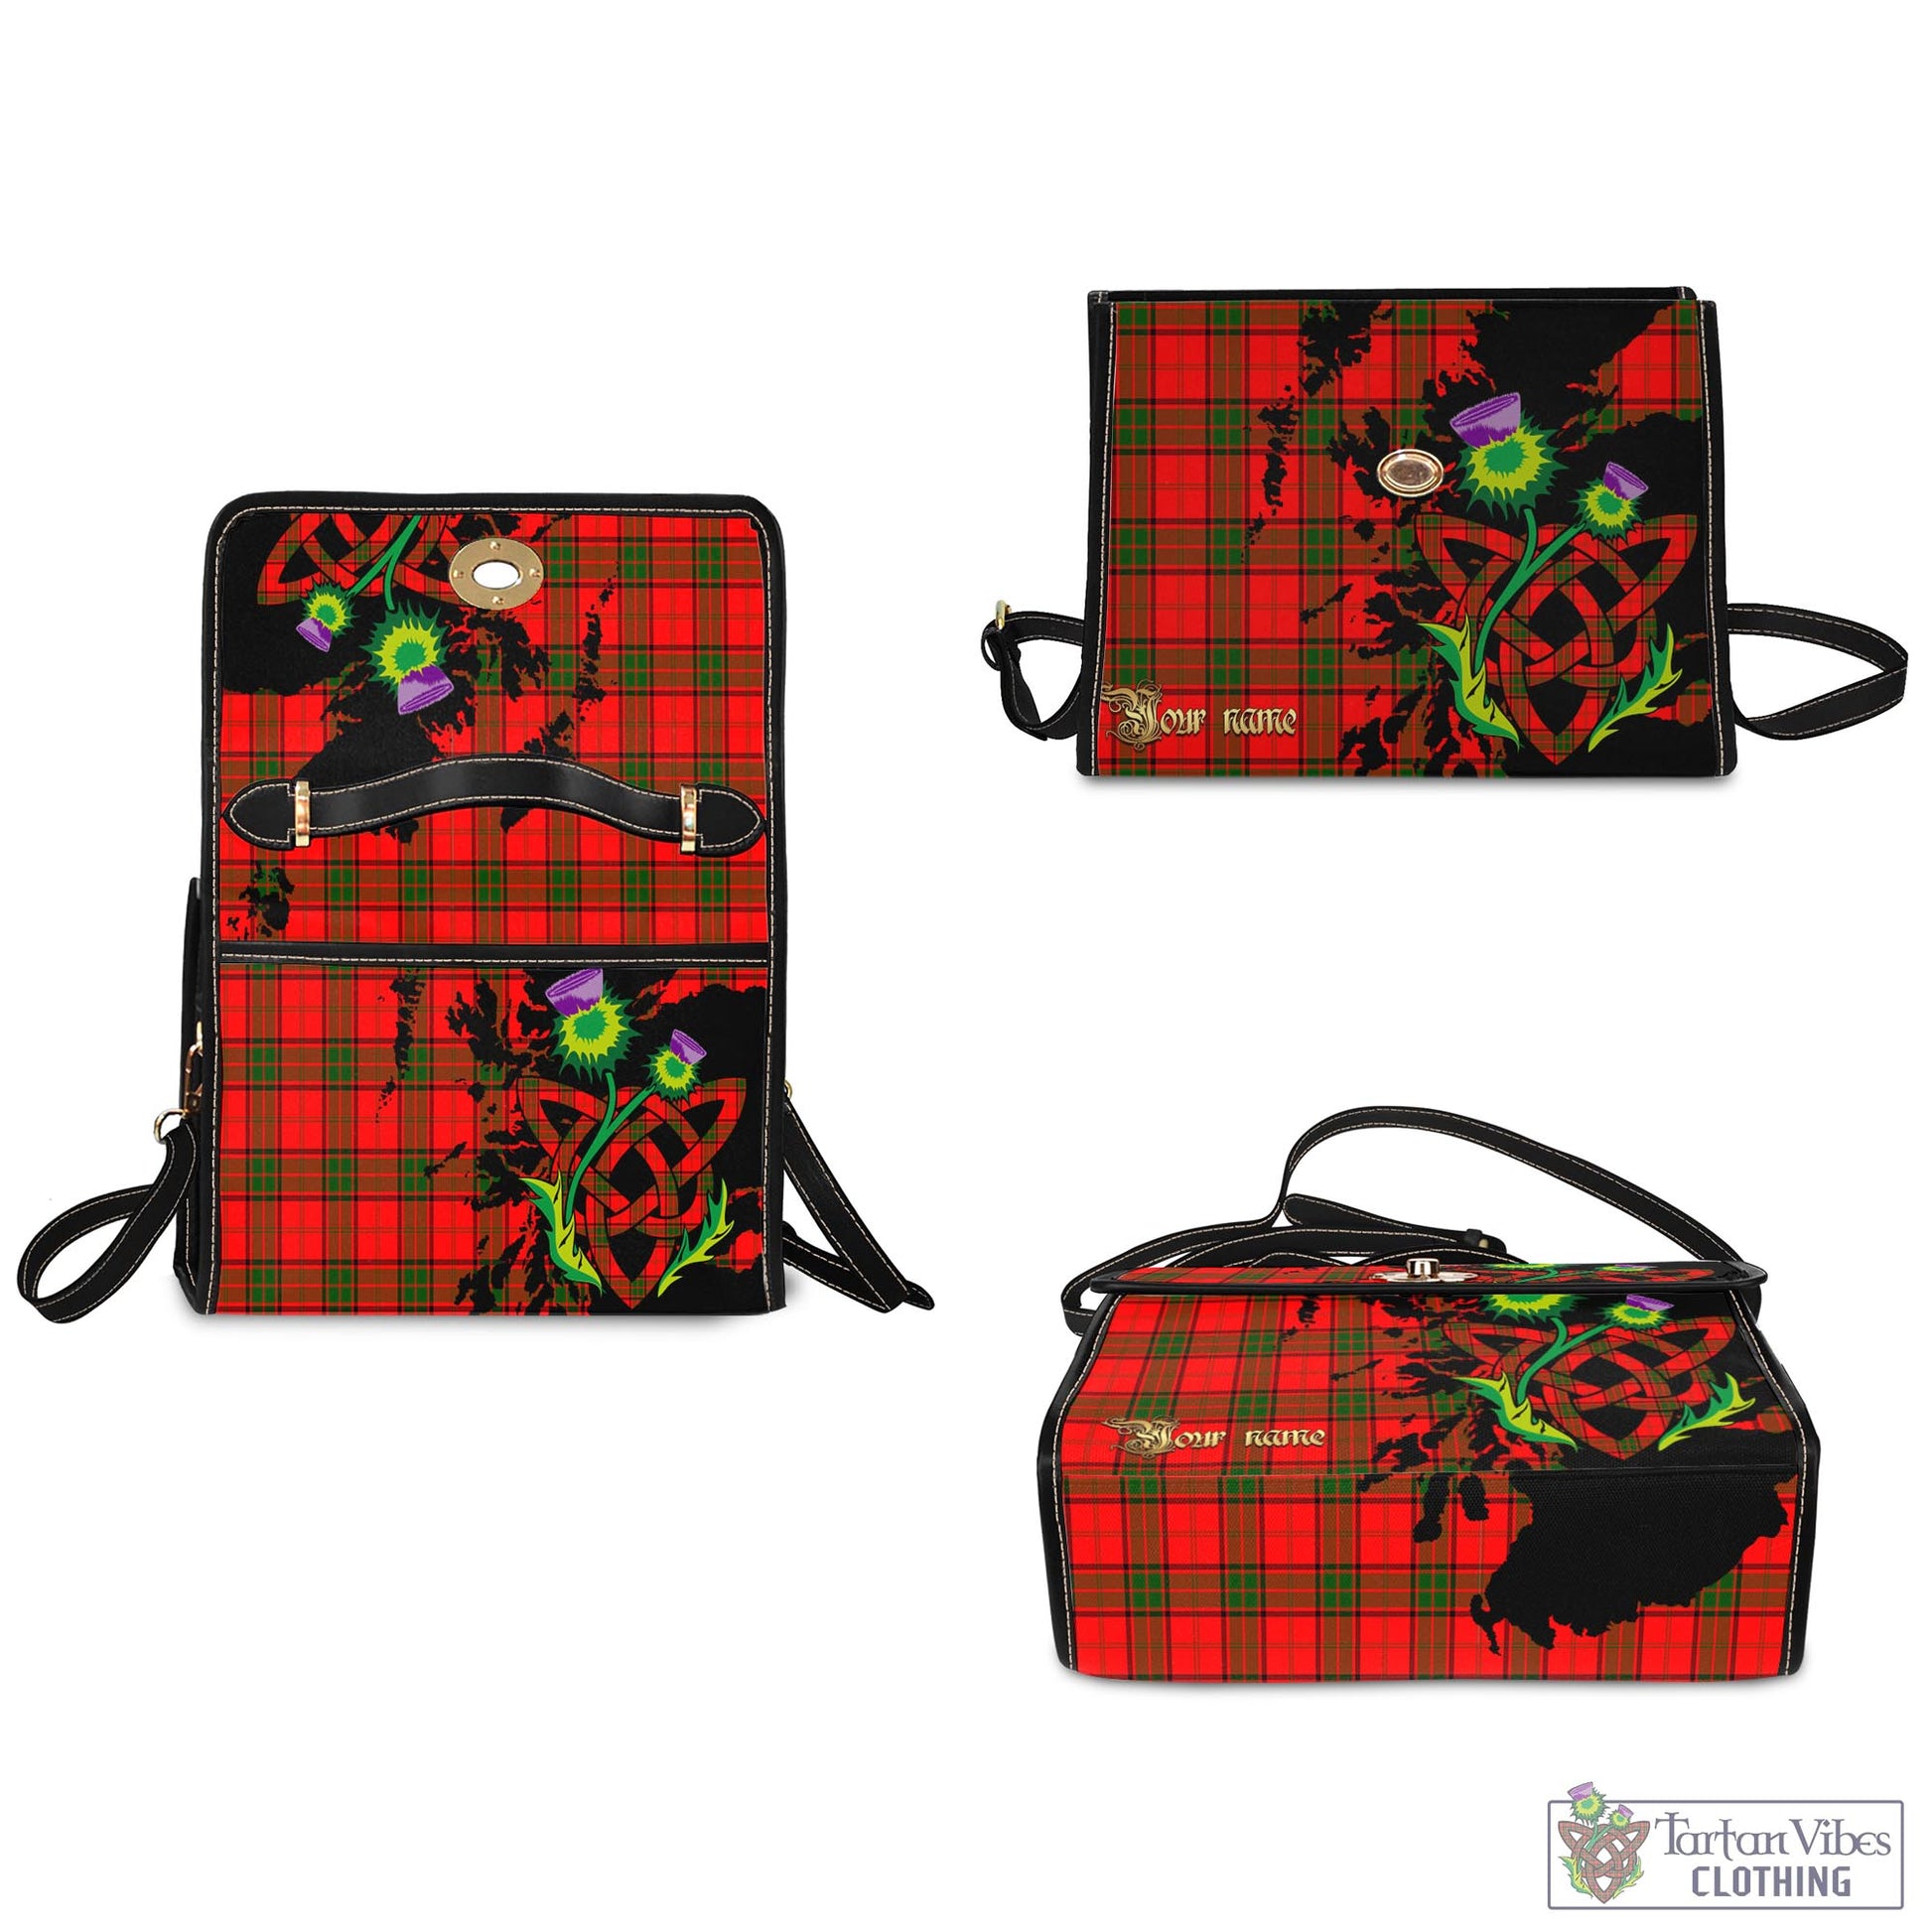 Tartan Vibes Clothing Adair Tartan Waterproof Canvas Bag with Scotland Map and Thistle Celtic Accents